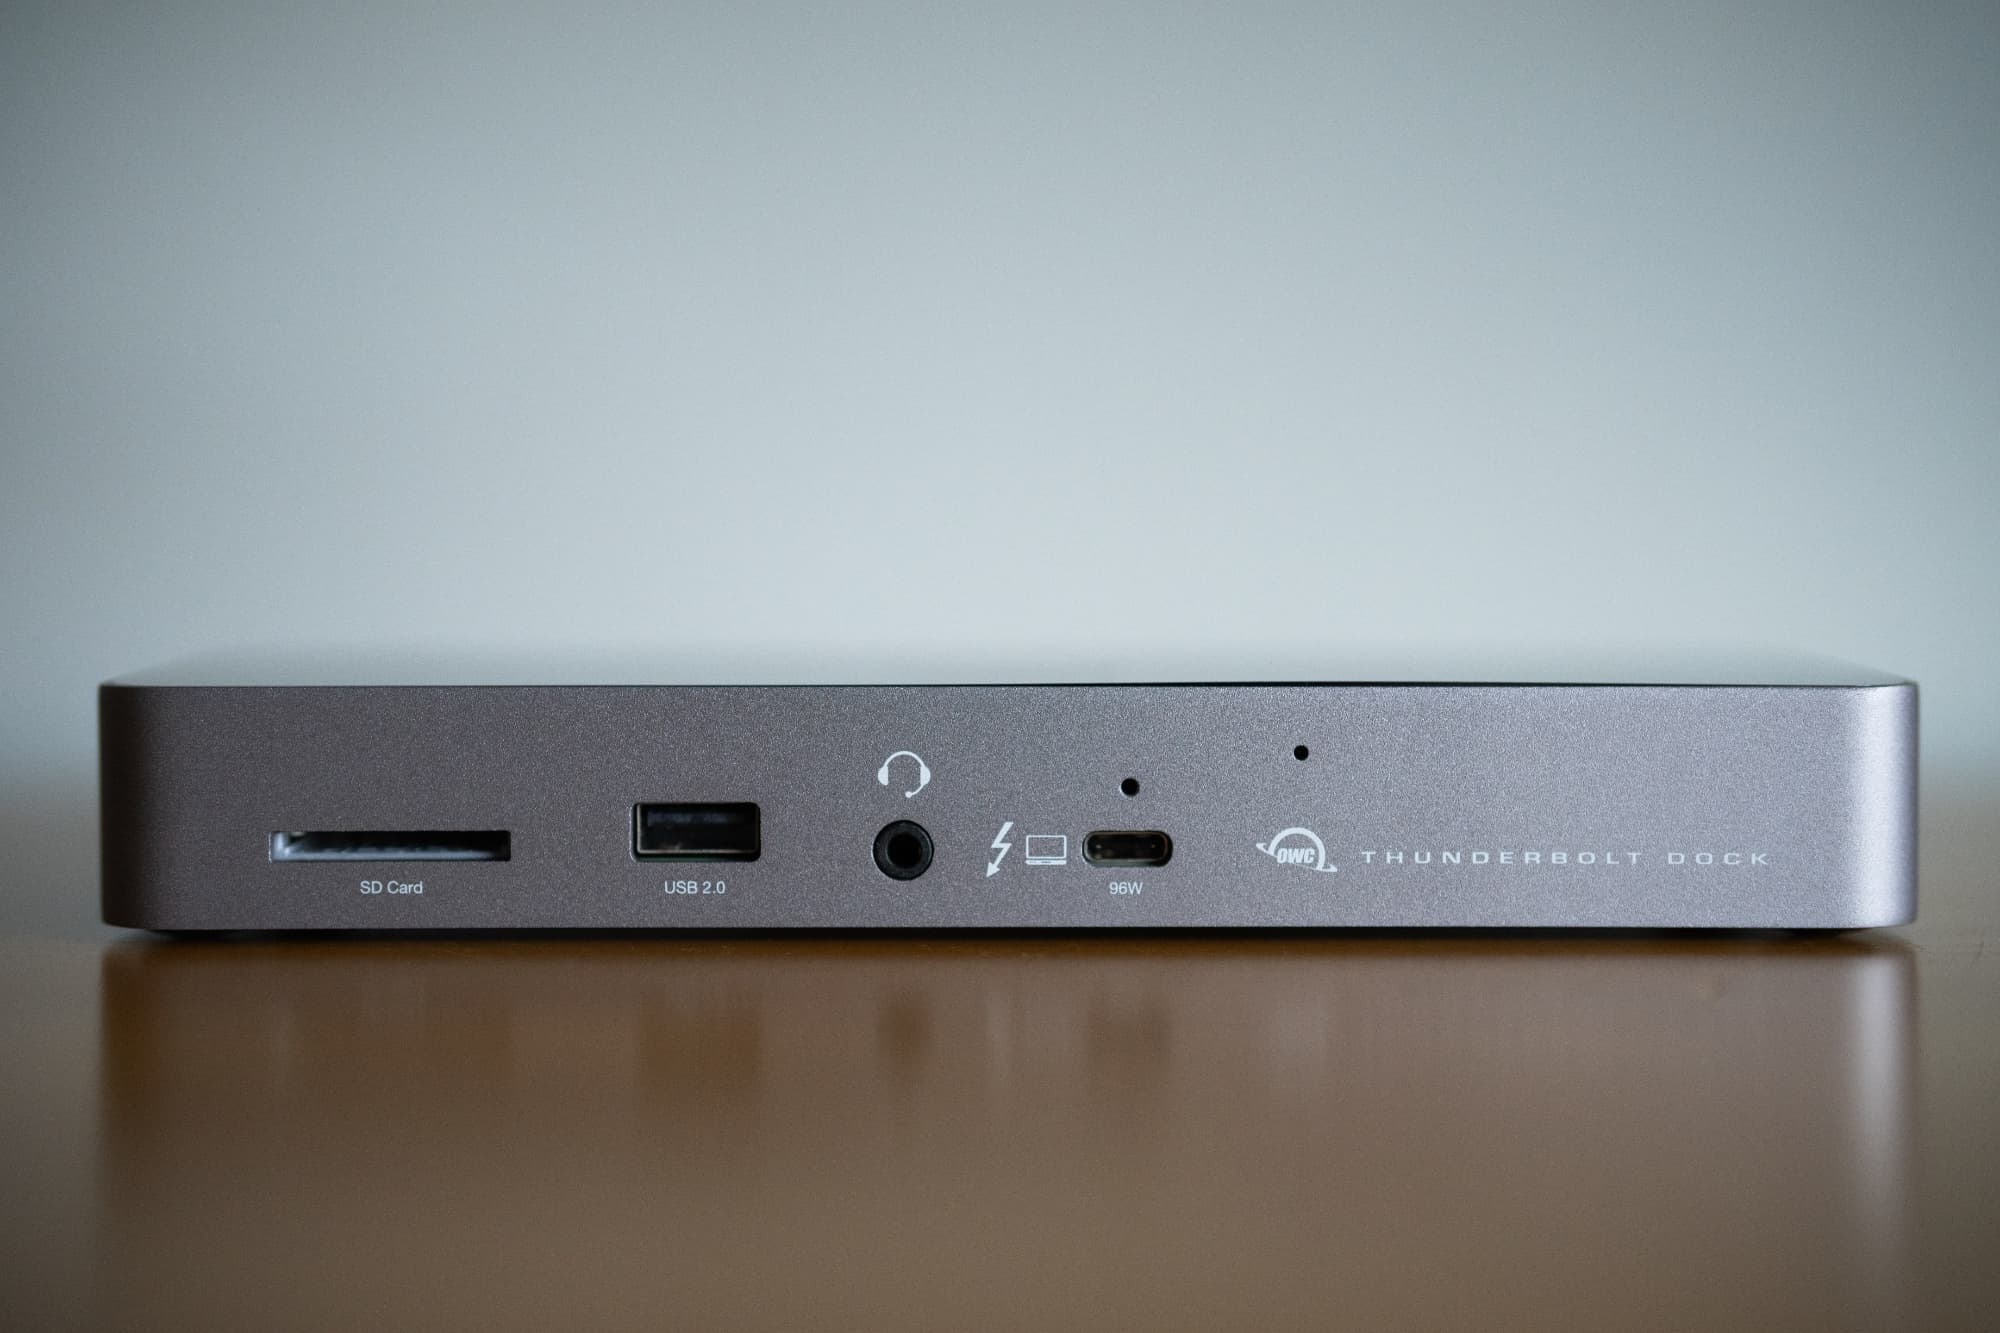 OWC Thunderbolt 4 Dock front.